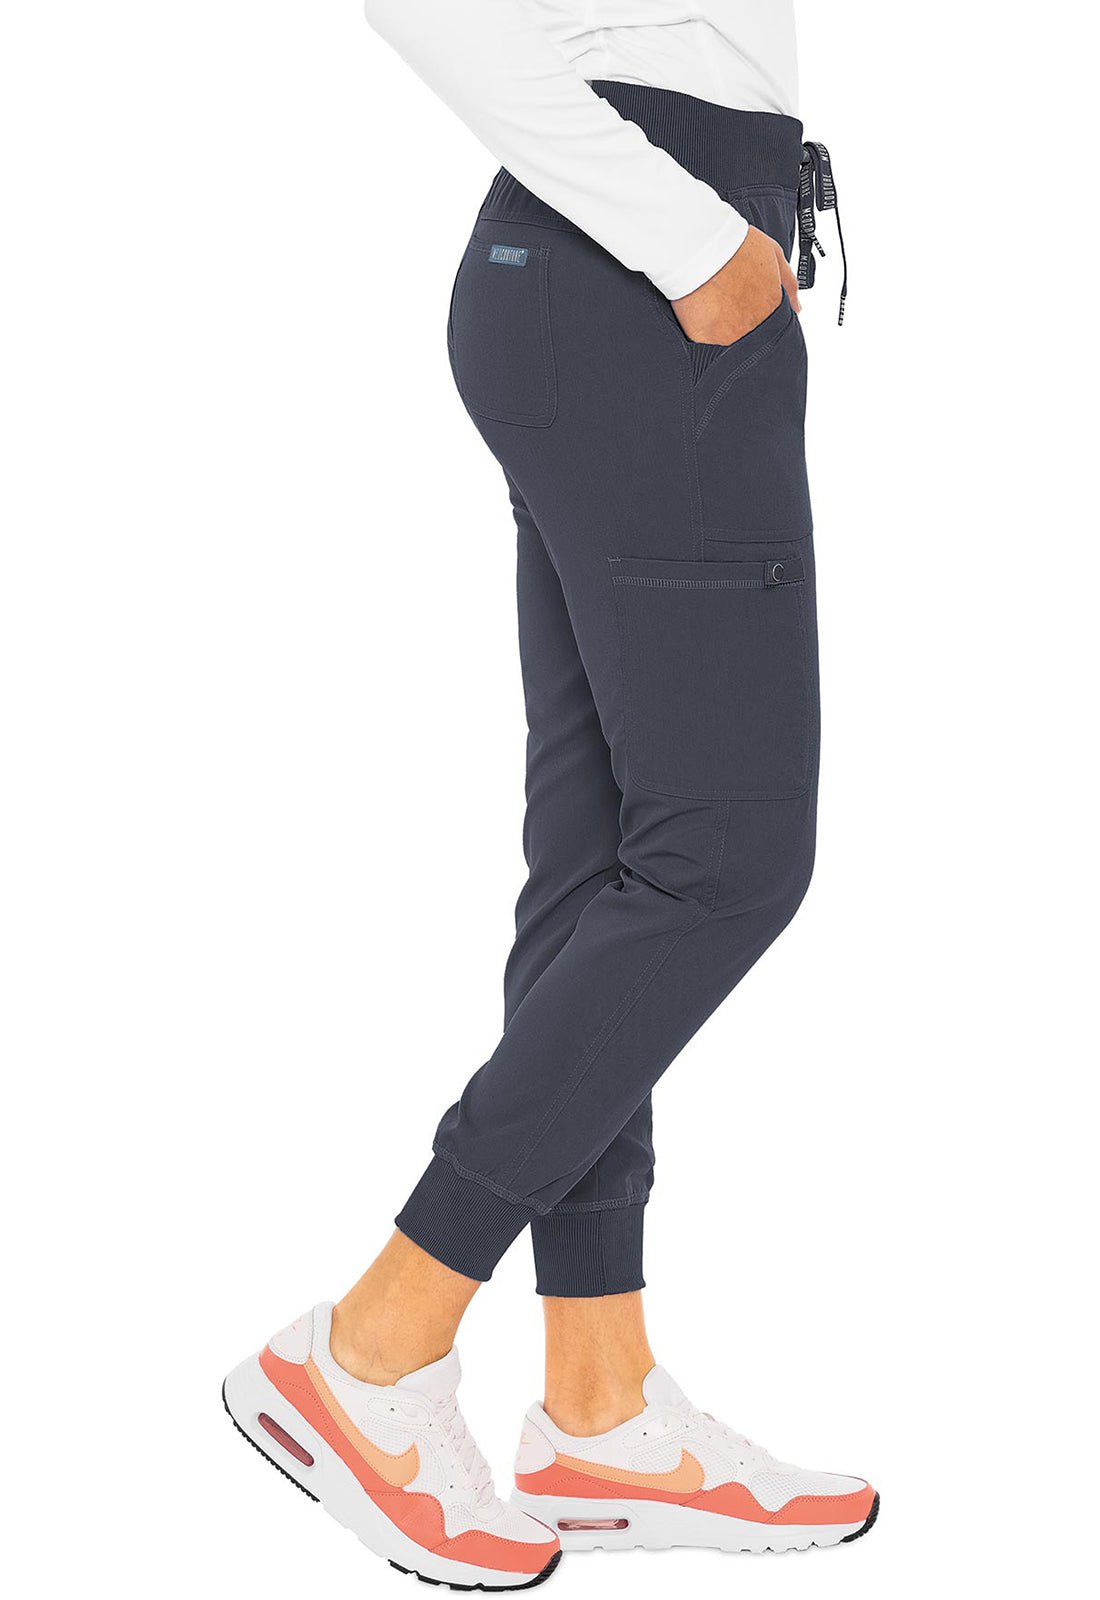 Med Couture Touch Jogger Yoga Scrub Pant MC7710 in Black, Navy, Pewter, Royal - Scrubs Select